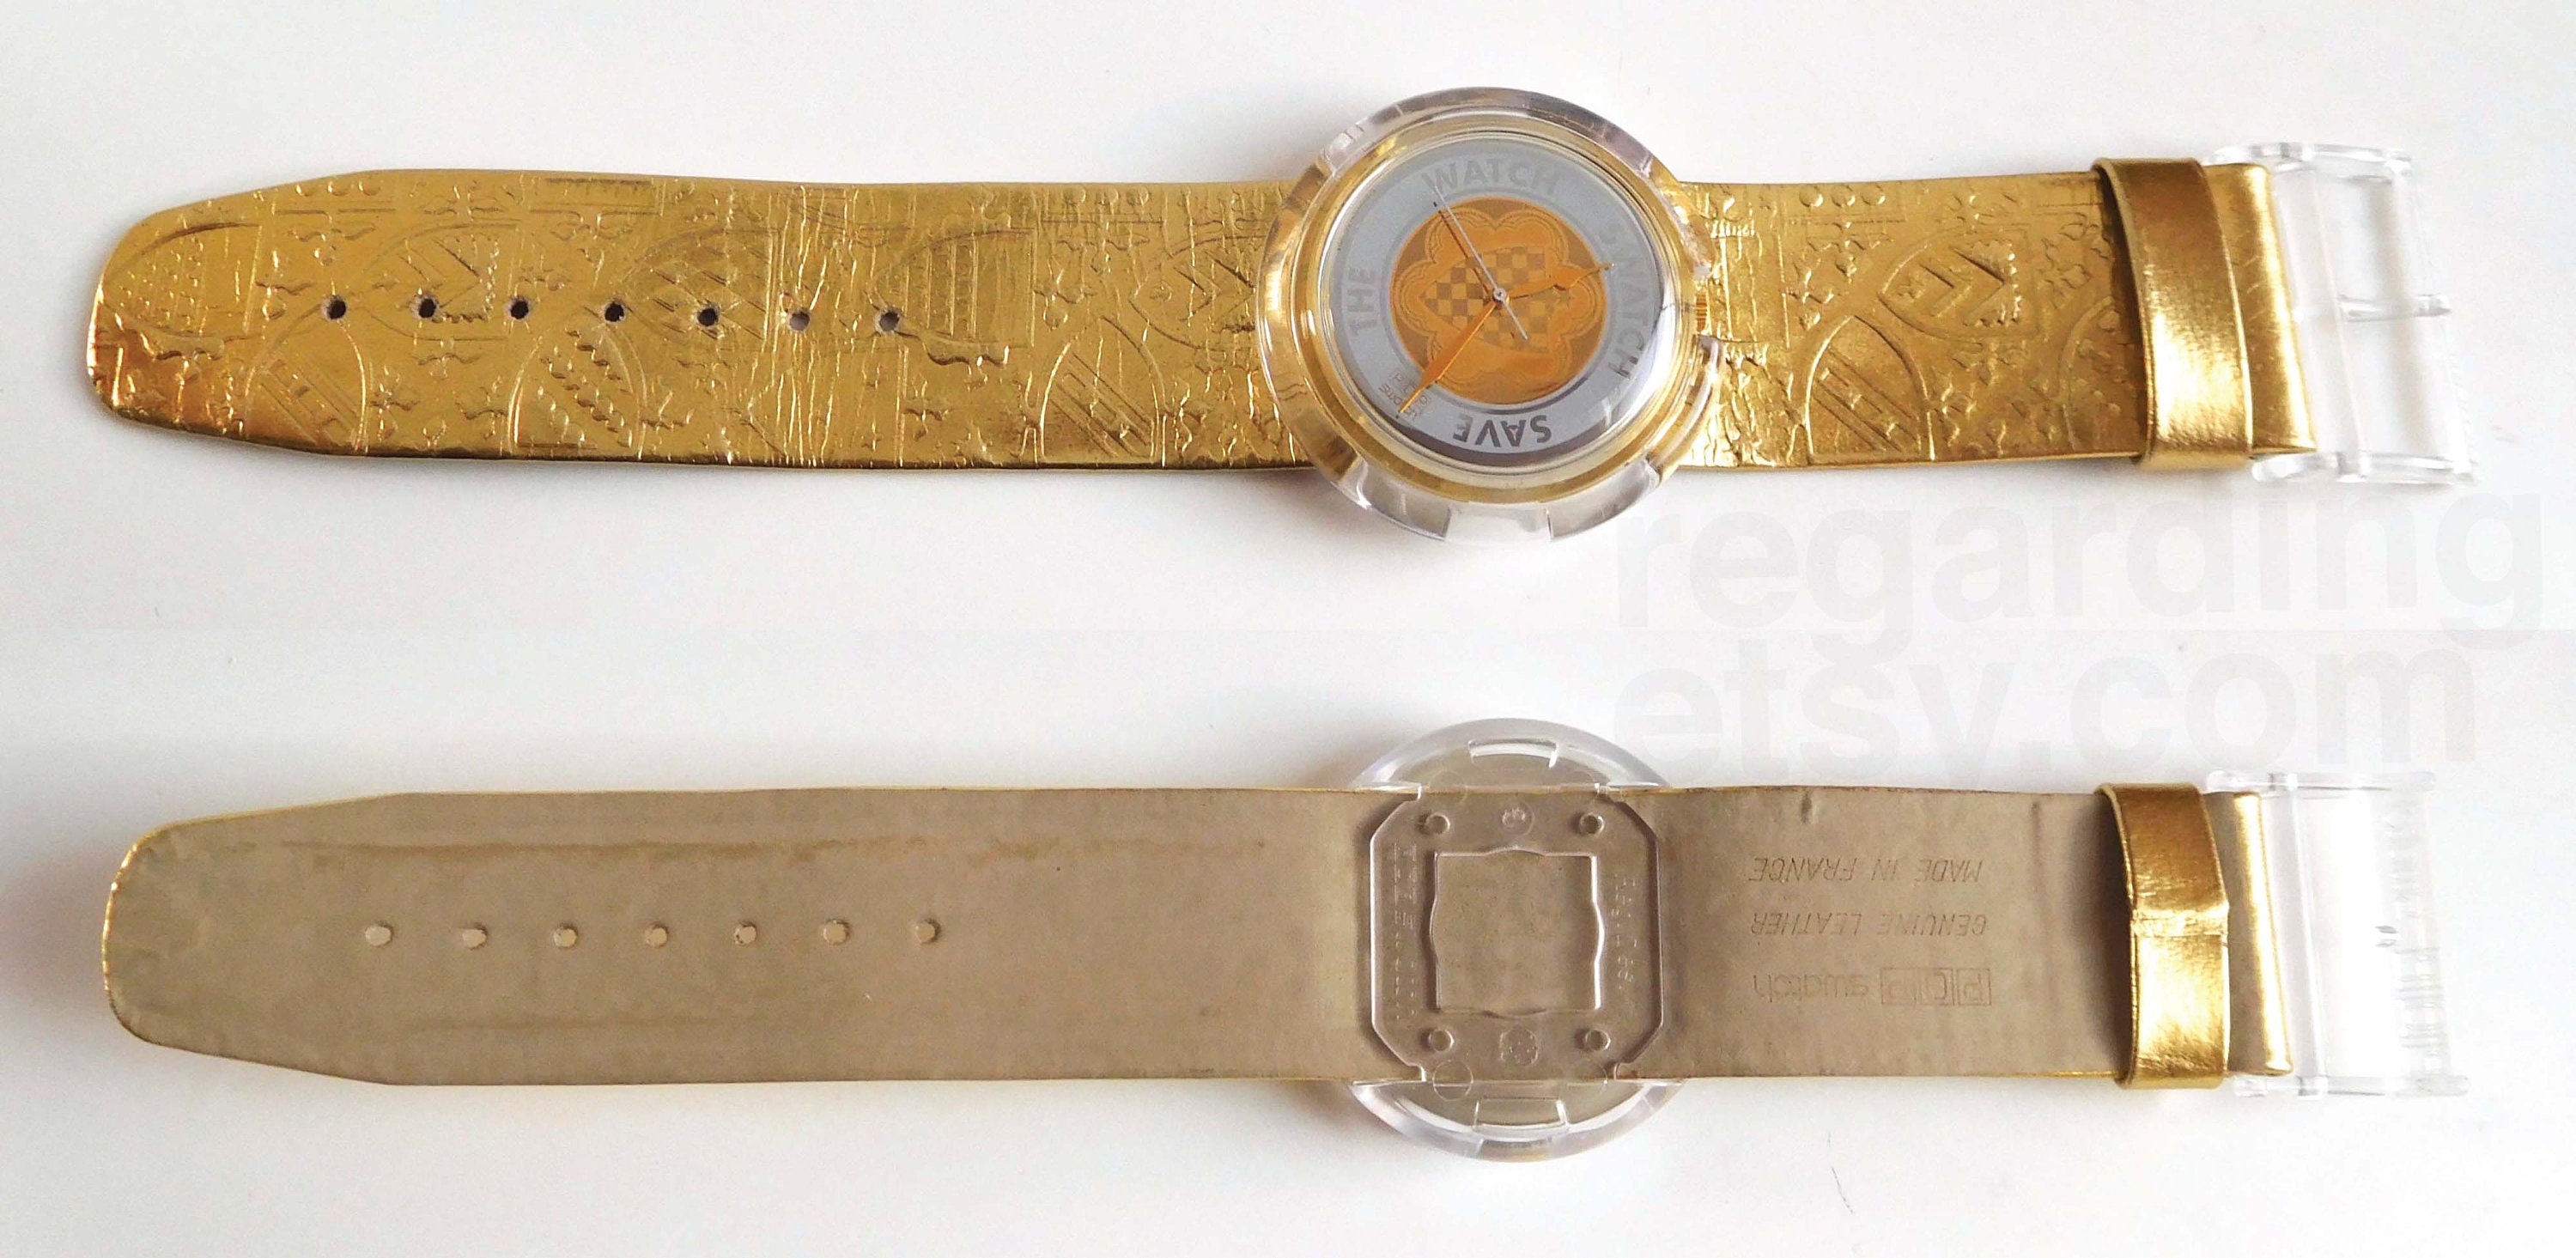 Jewellery Watches Wrist Watches Unisex Wrist Watches Vintage POP Swatch Watch Guinevere PWK169 1991 39mm face Never Worn New In Box with battery running gold tone patterned leather band GREAT! 